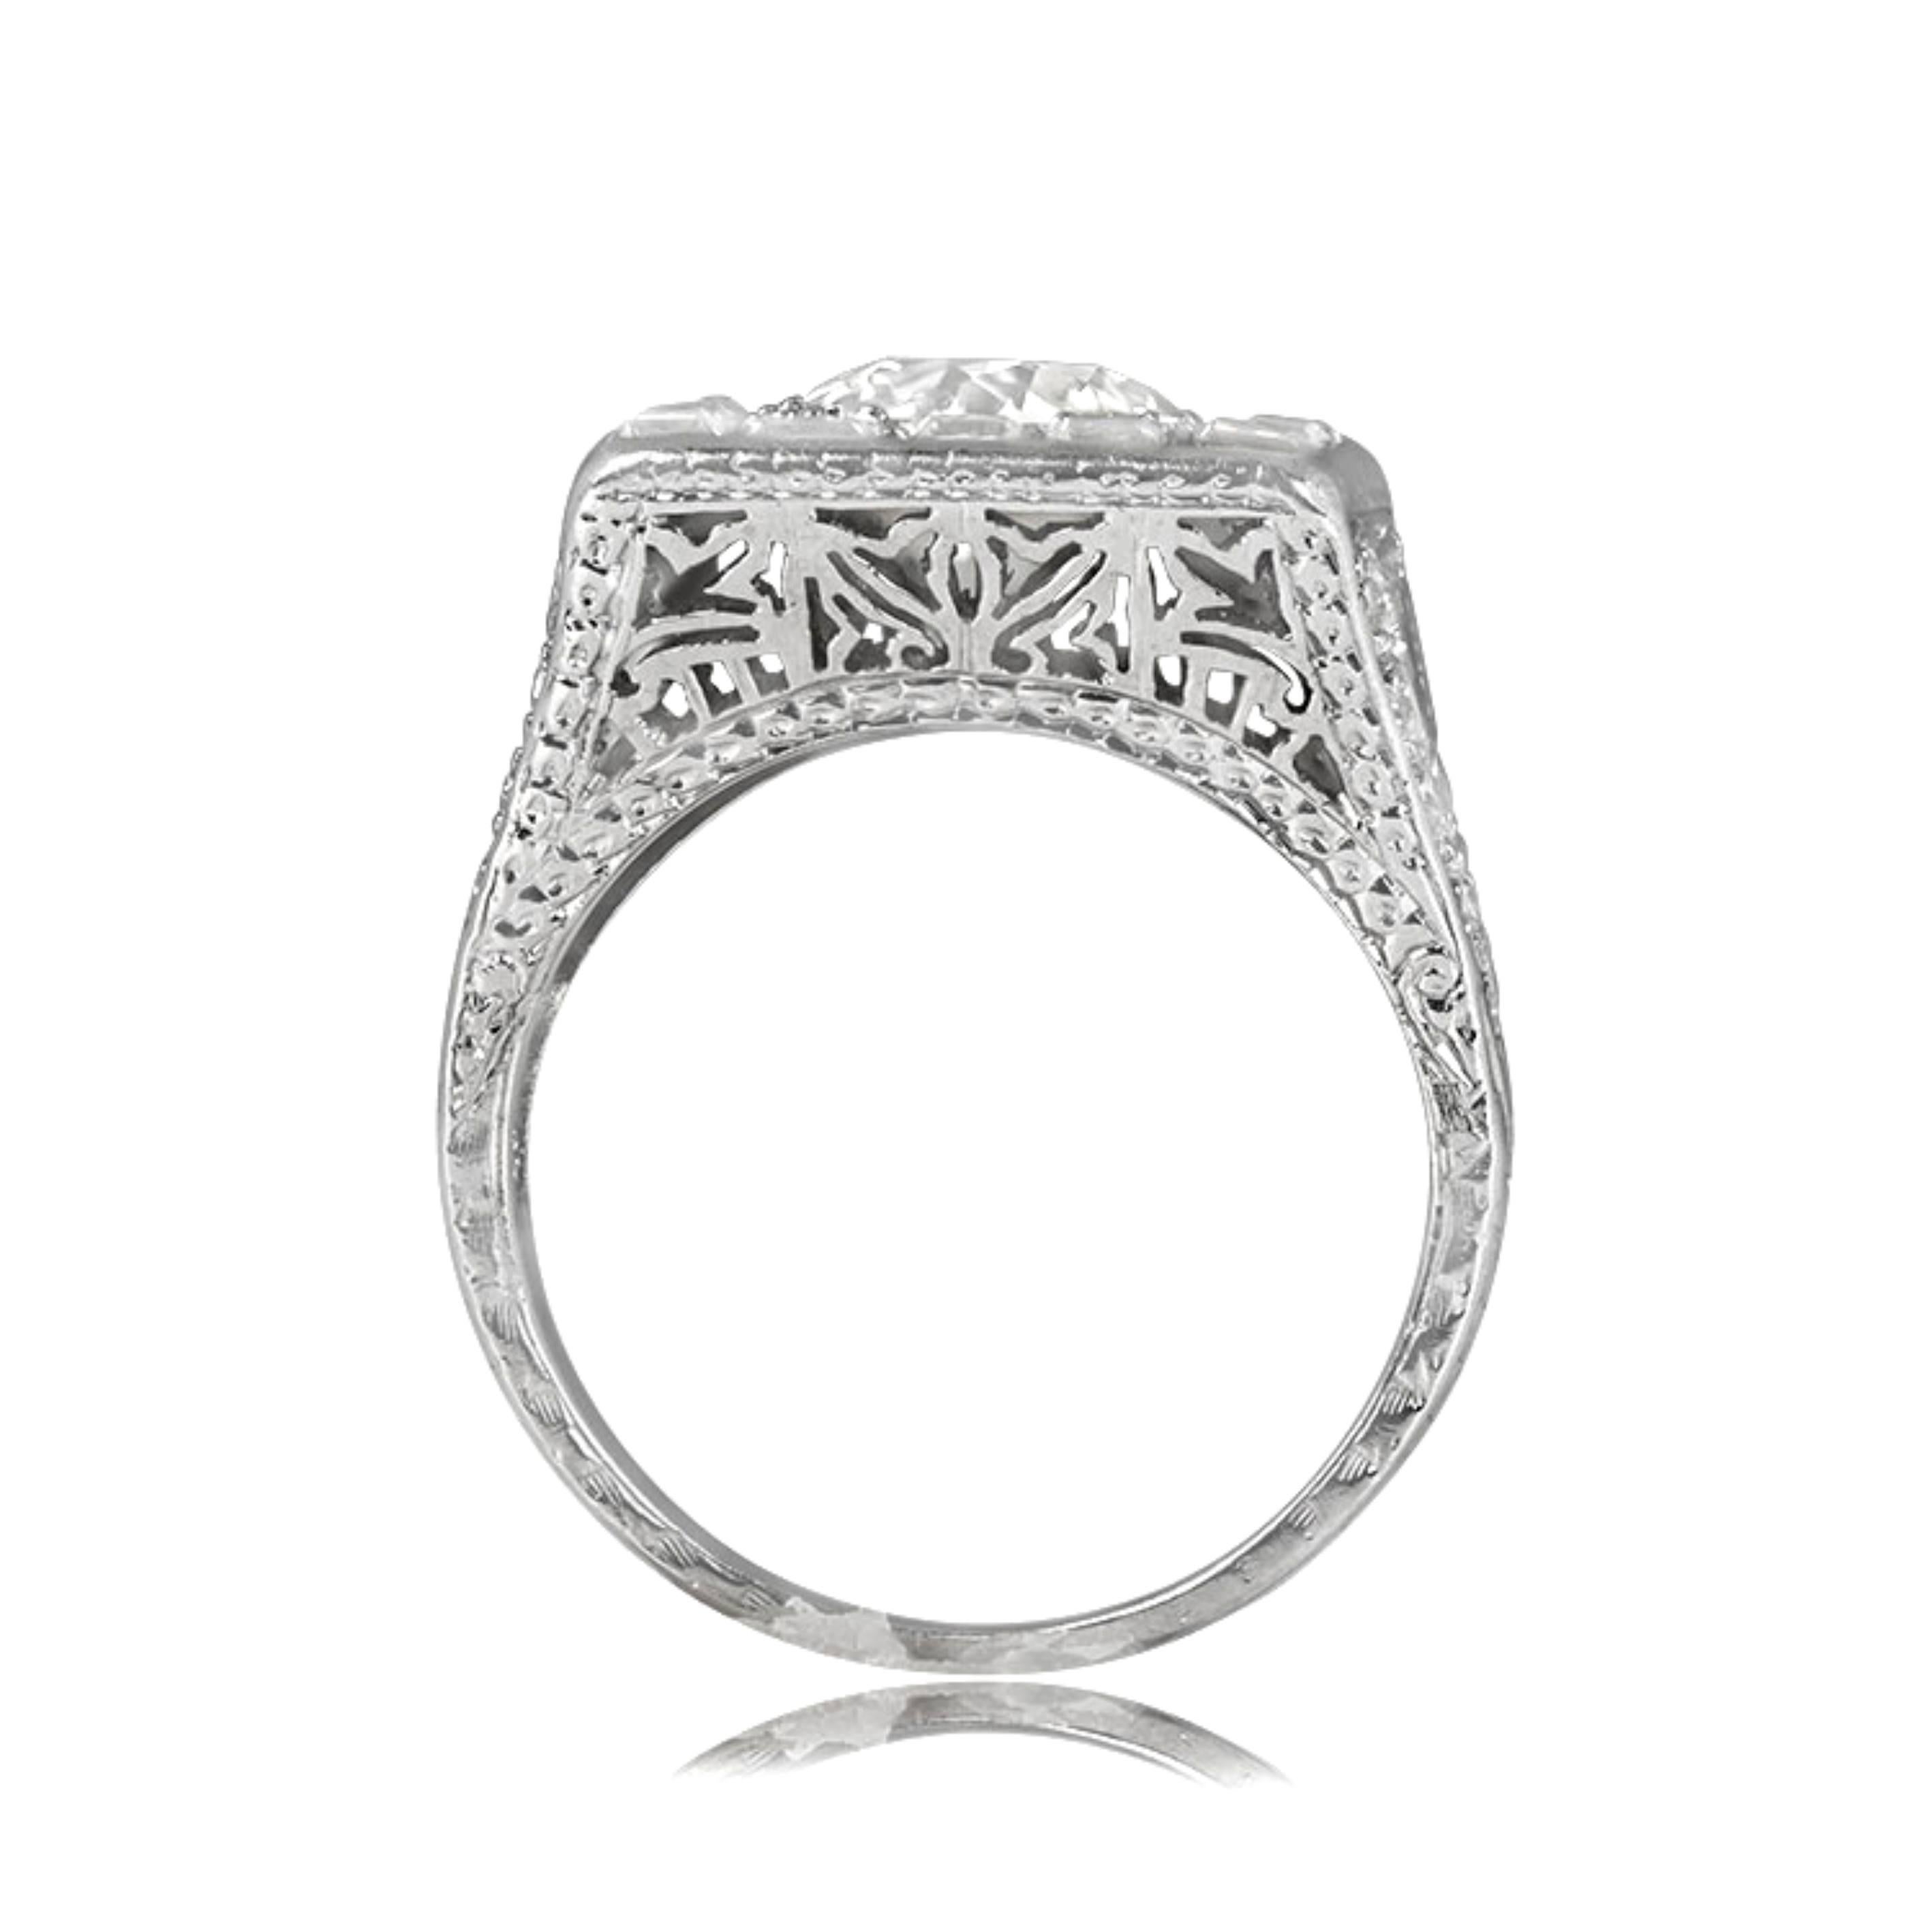 Art Deco era diamond halo engagement ring with 1.75ct old European cut diamond in K color, VS2 clarity, box prong-set with small old European cut diamonds. Features antique carre and trillion cut diamonds, floral openwork under-gallery,